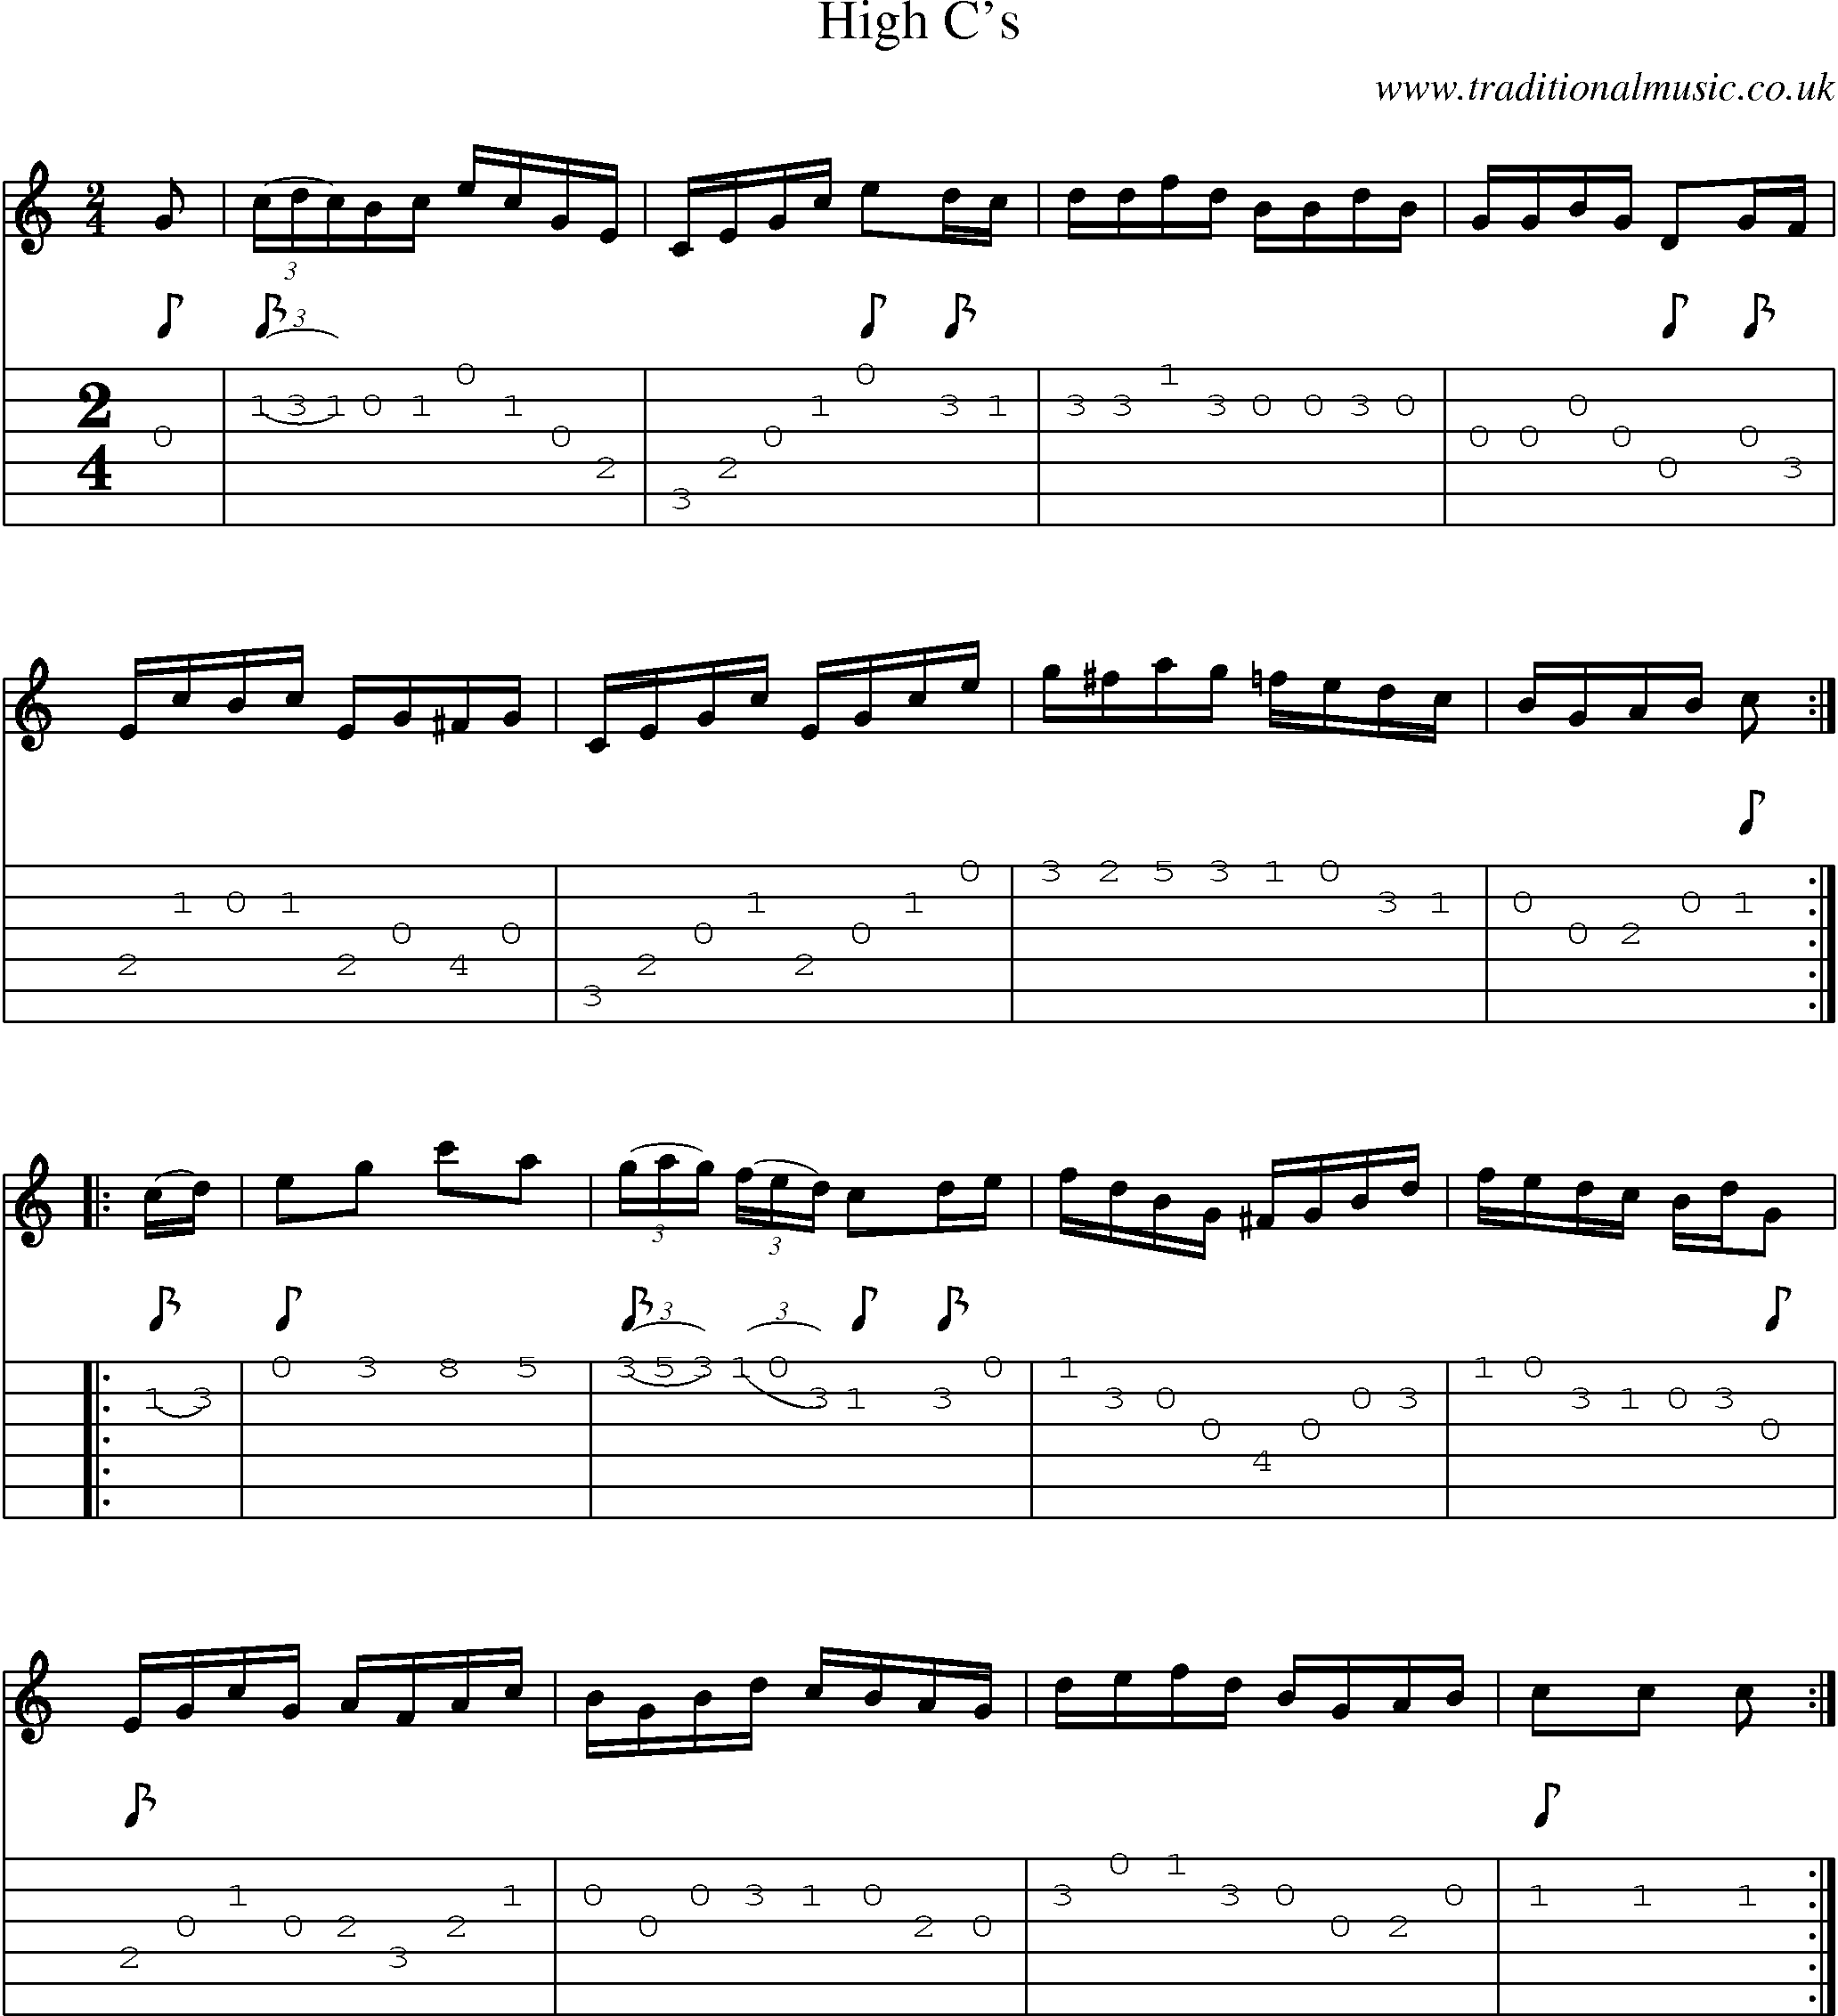 Music Score and Guitar Tabs for High Cs